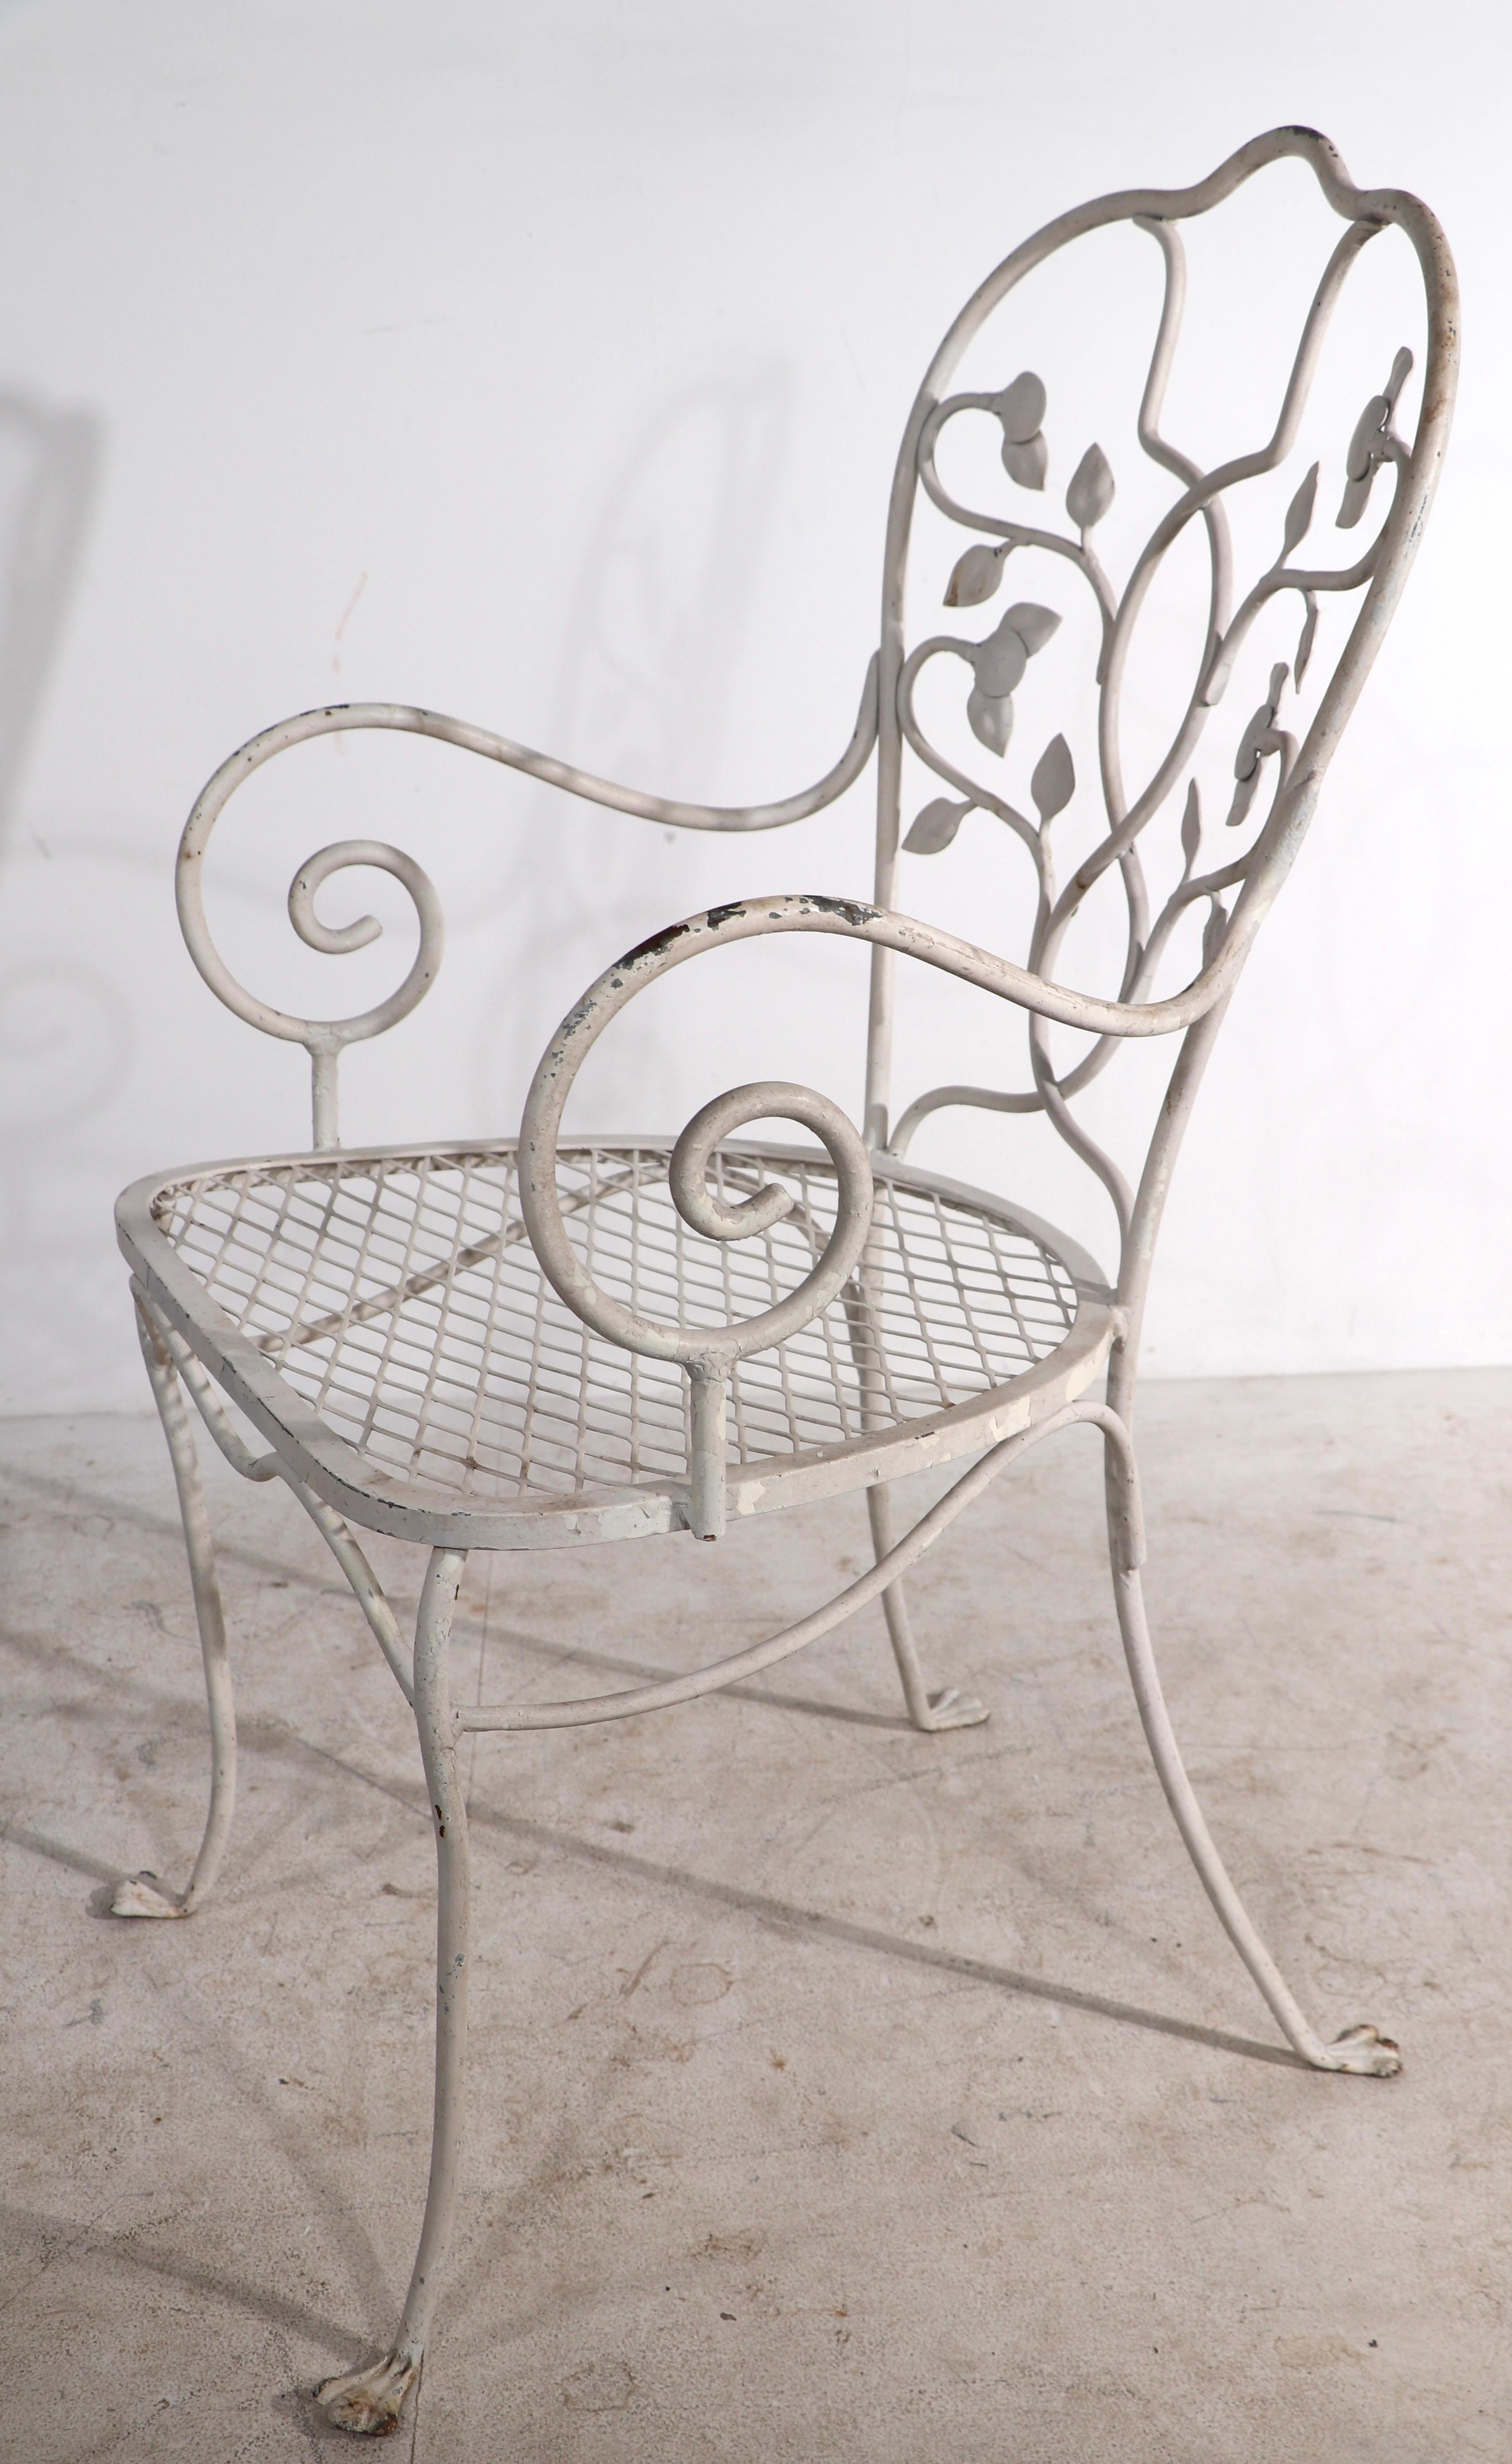 American Set of Four Wrought Iron Garden Patio Chairs by Salterini 